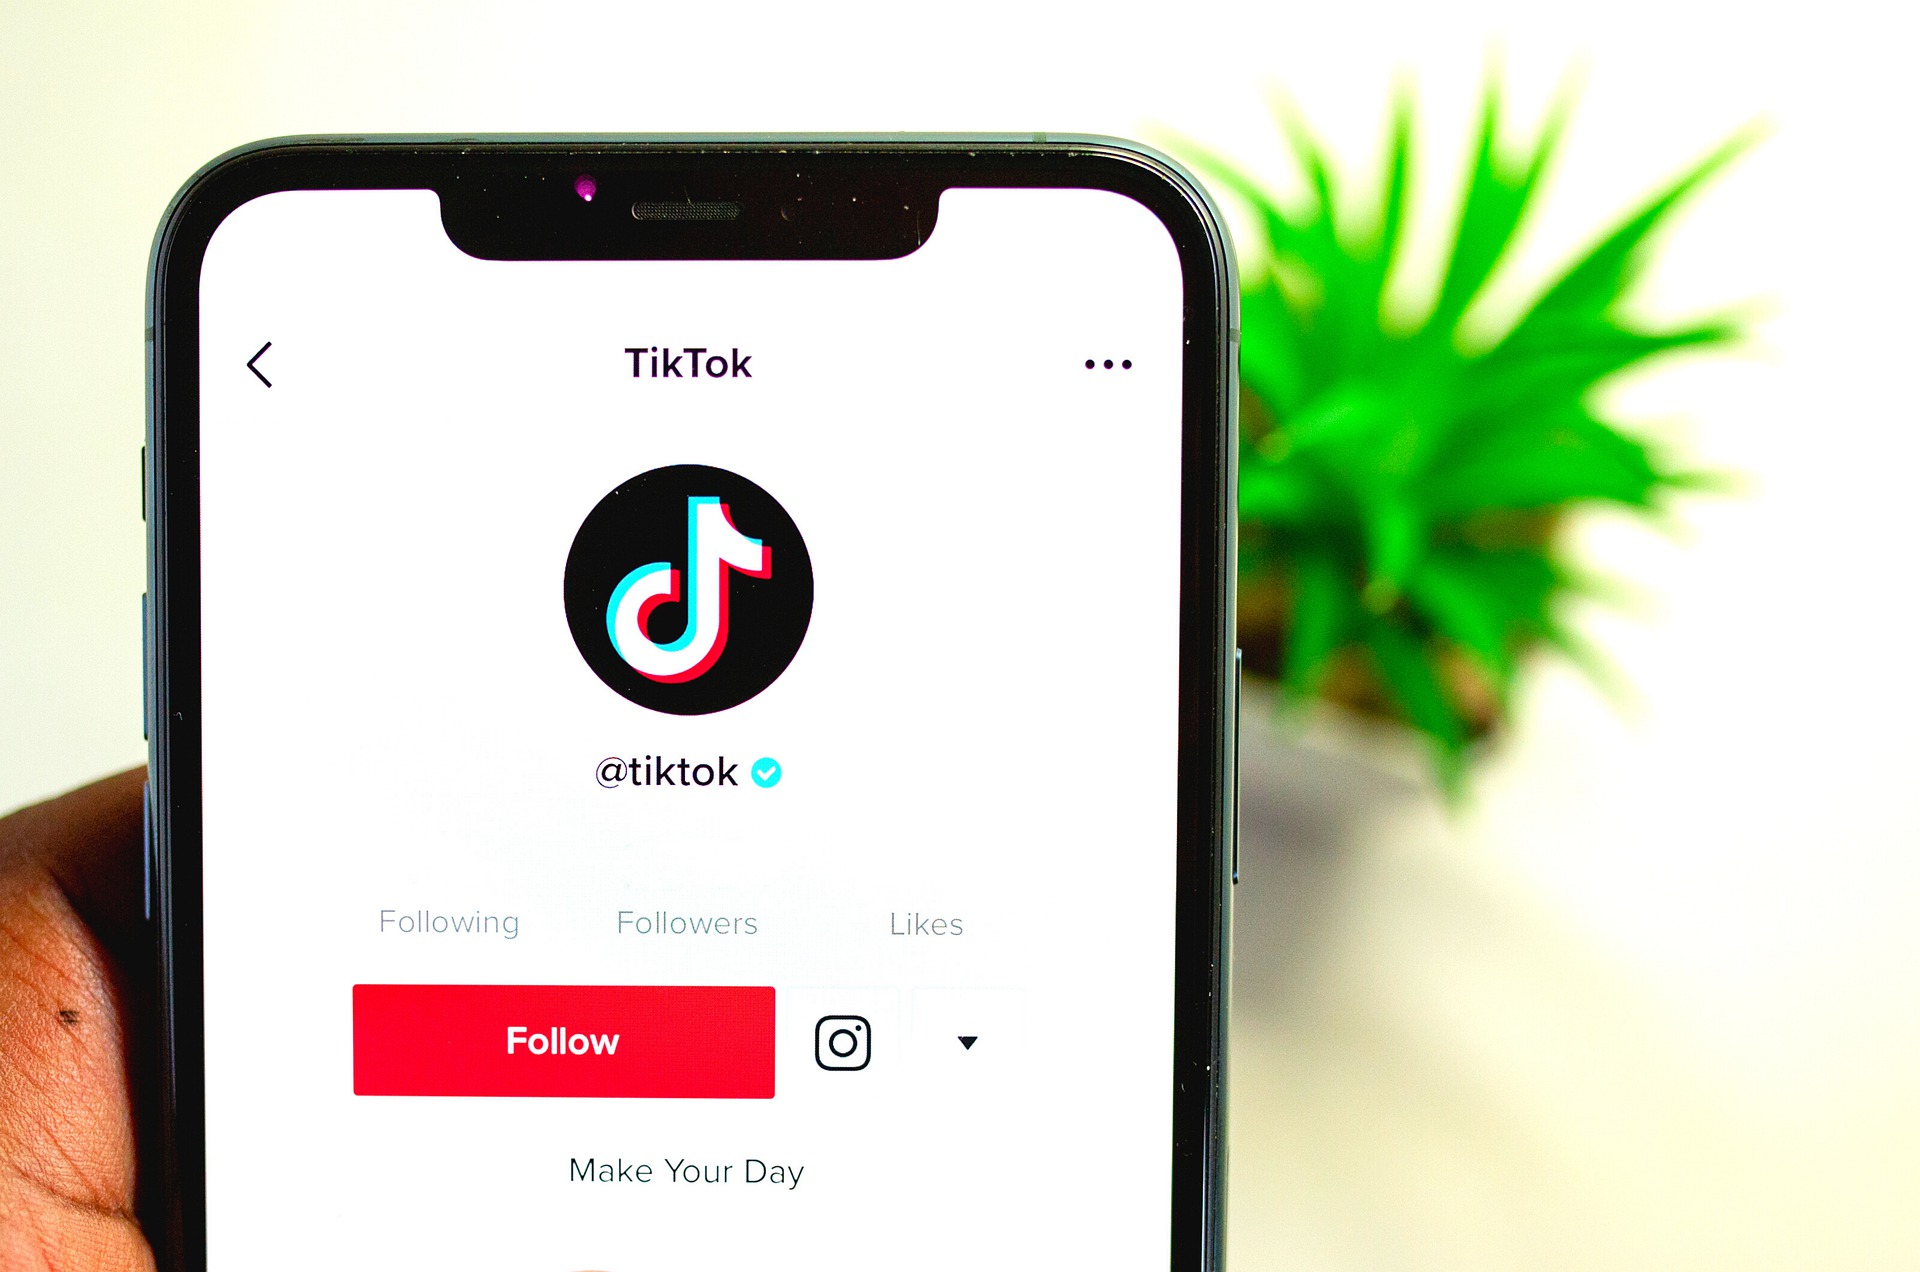 Why I started using TikTok in the first place